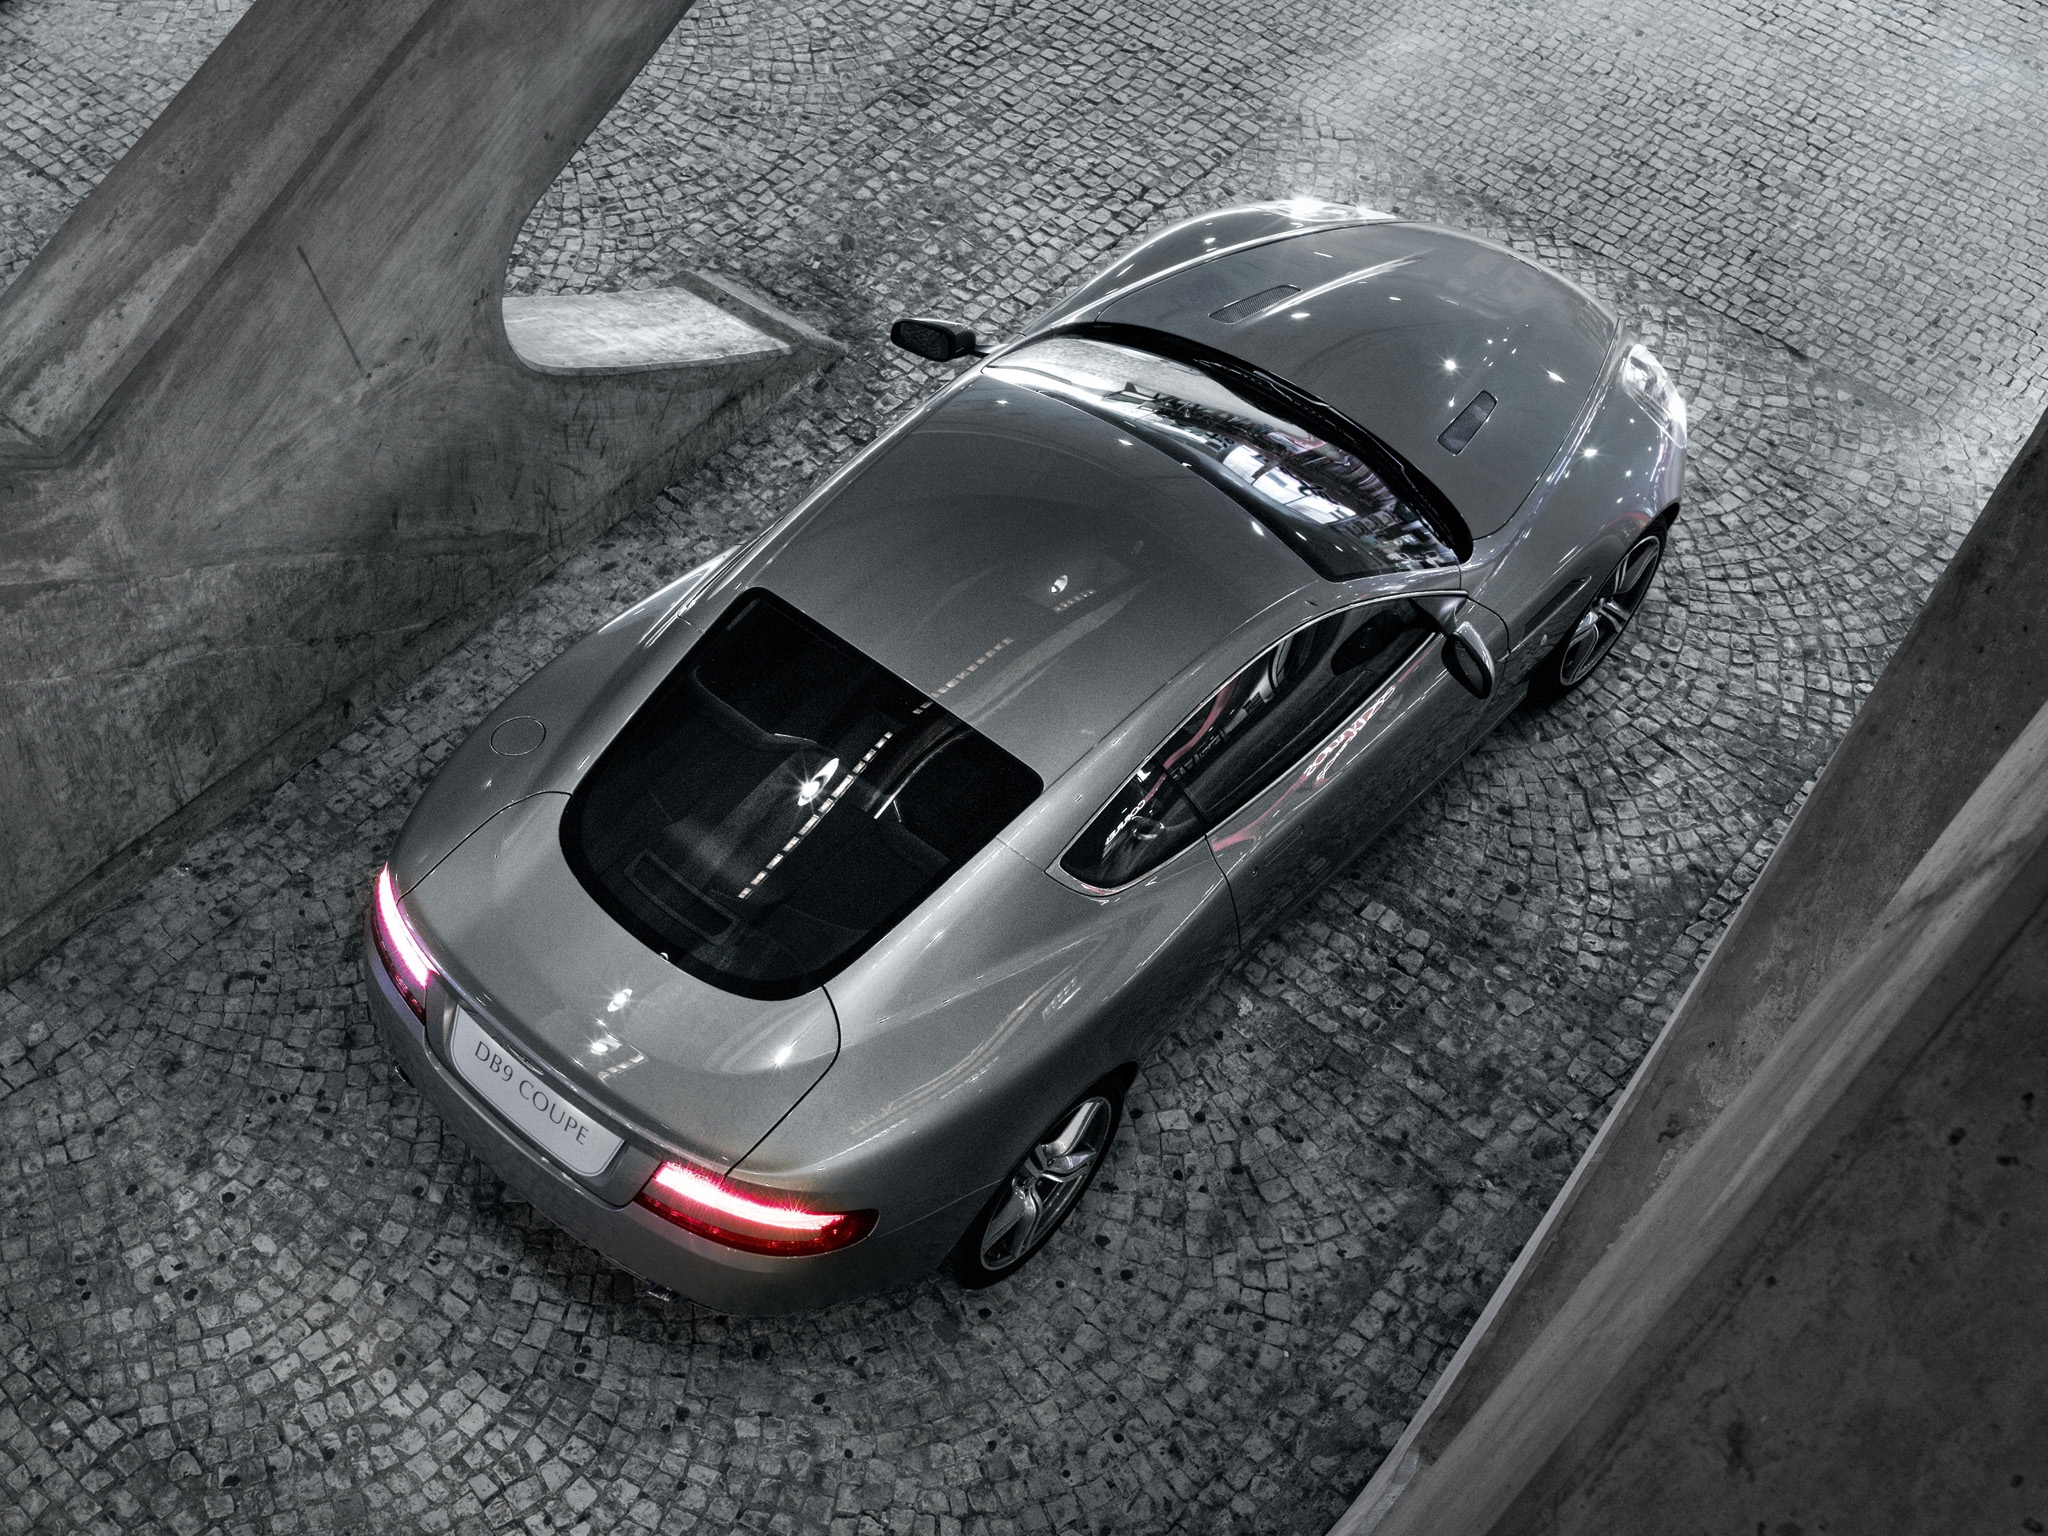 Free download wallpaper Auto, View From Above, Style, 2008, Db9, Metallic Gray, Grey Metallic, Aston Martin, Cars, Reflection on your PC desktop